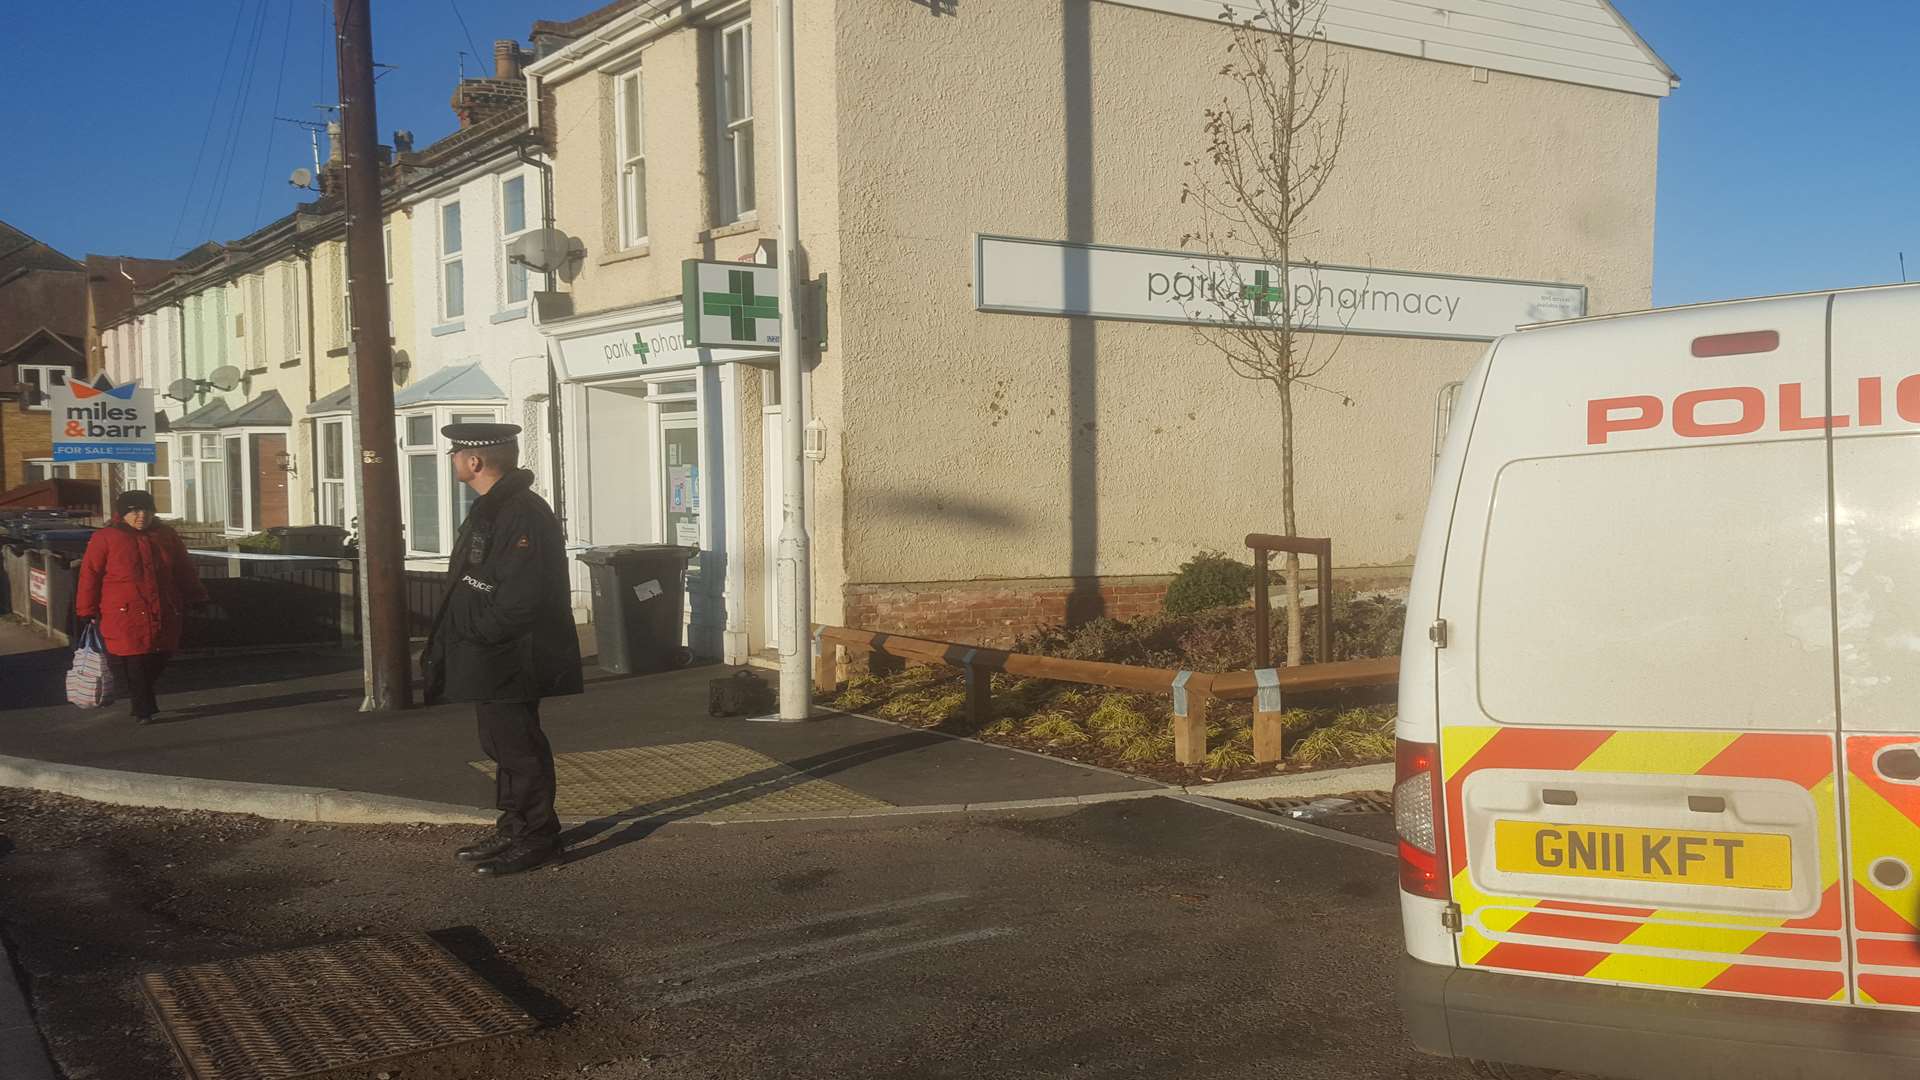 Police were called to Park Pharmacy in December